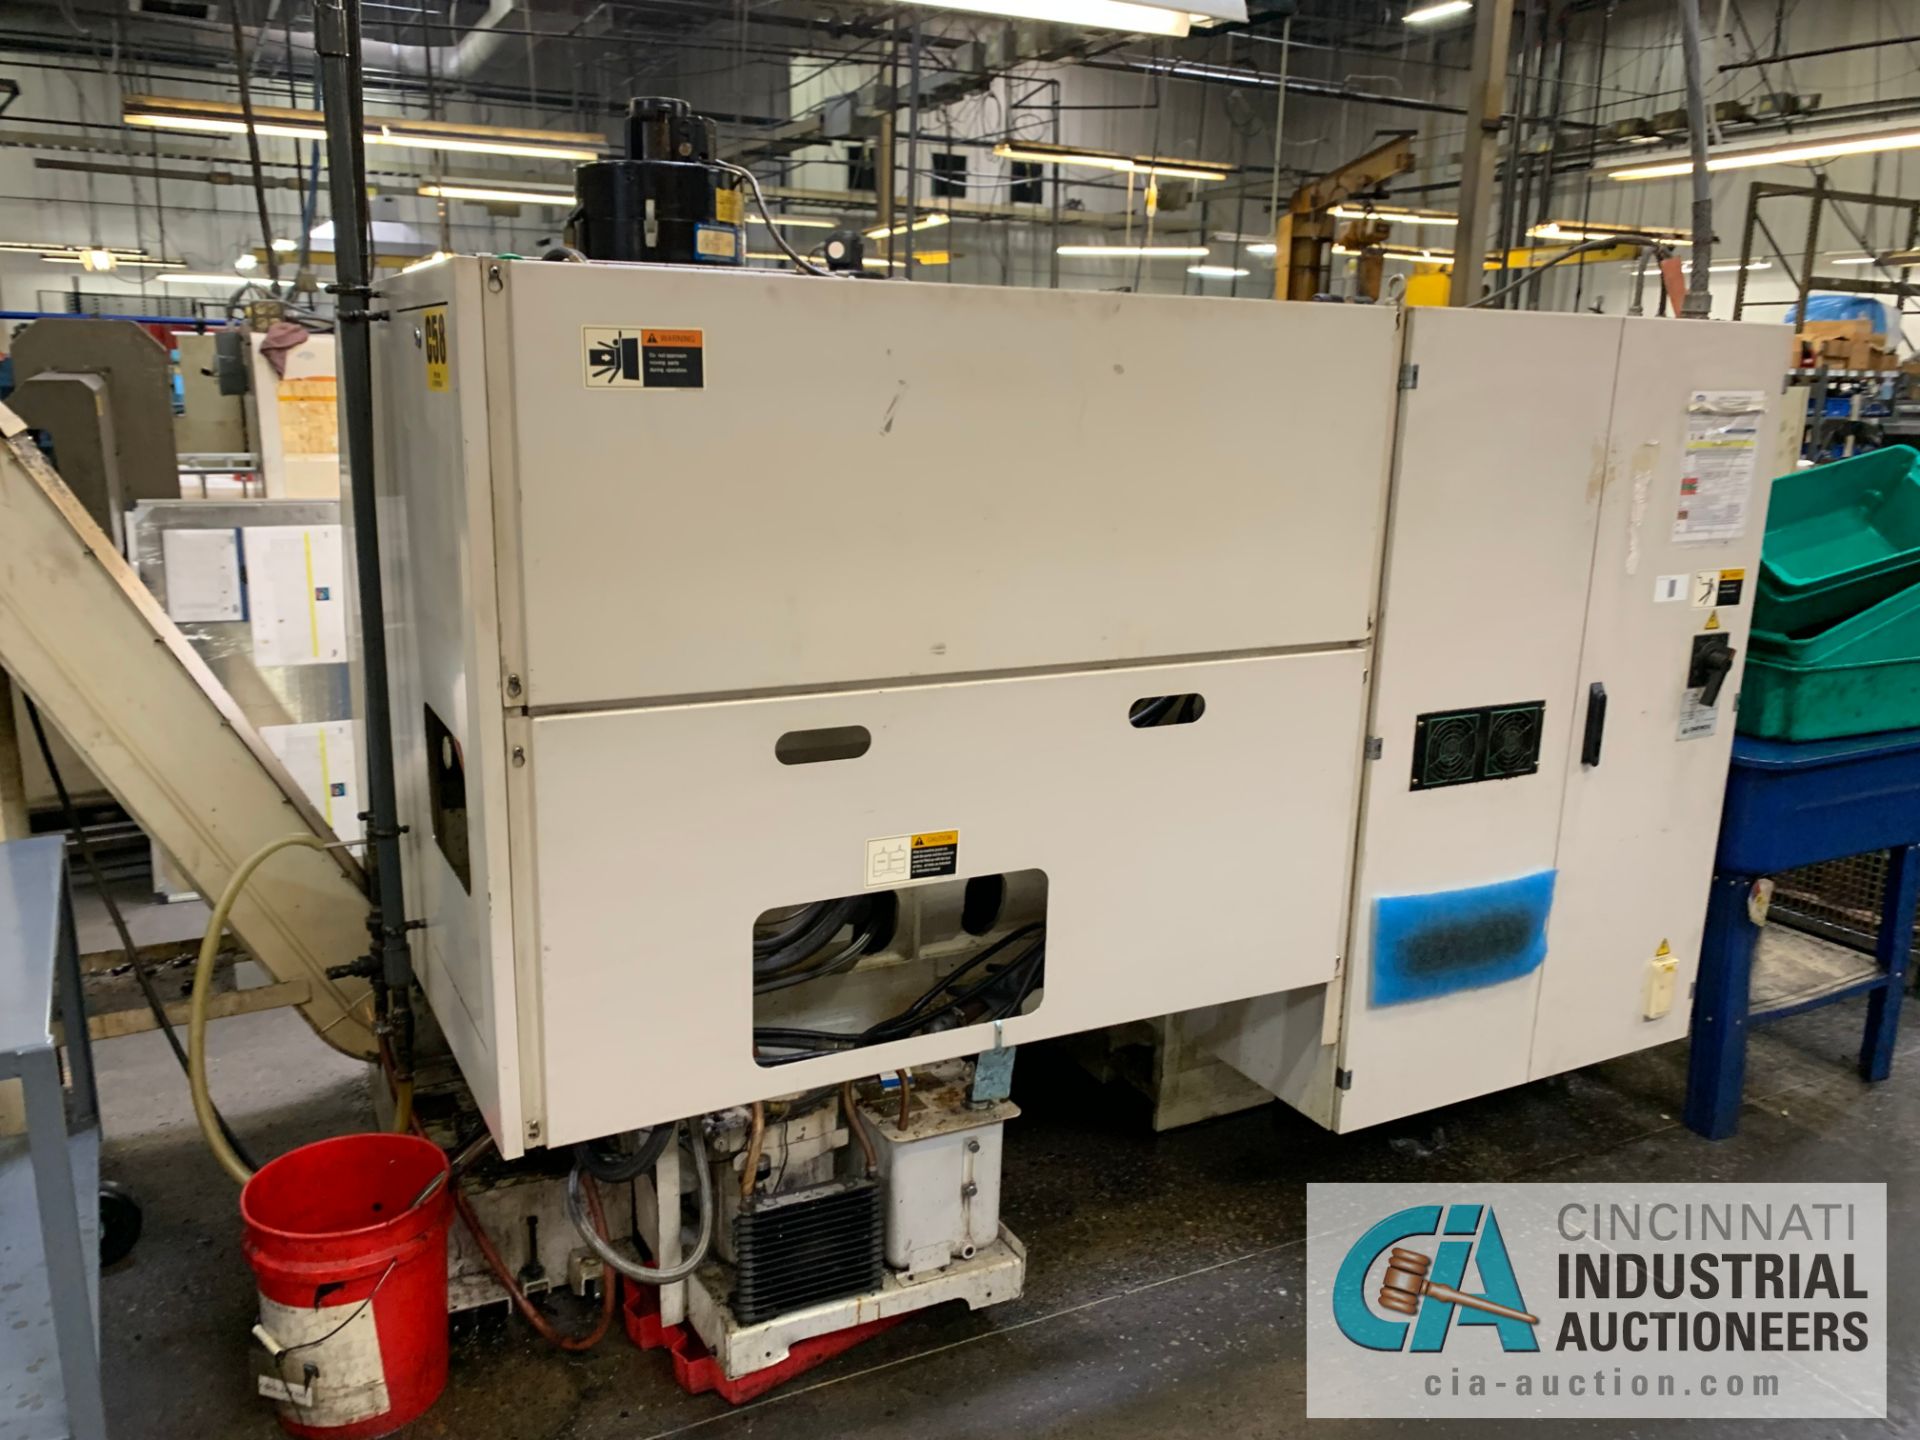 DAEWOO MODEL 200C CNC TURNING CENTER; S/N PM200550, 10" CHUCK, 10-STATION TURRET, TAILSTOCK, TURBO - Image 7 of 9